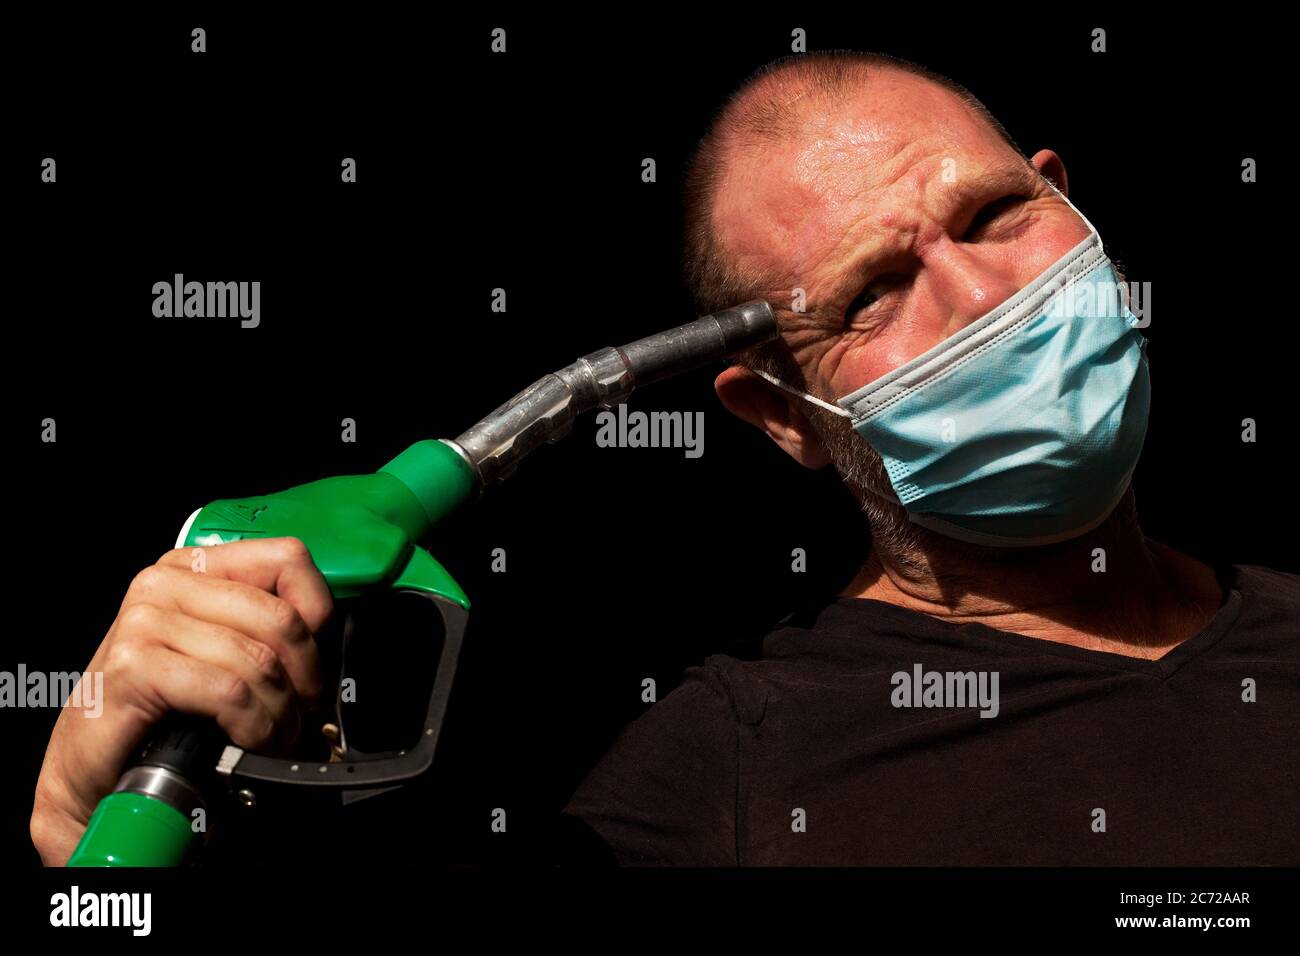 Man jokingly holds fuel nozzle to his head. Stock Photo